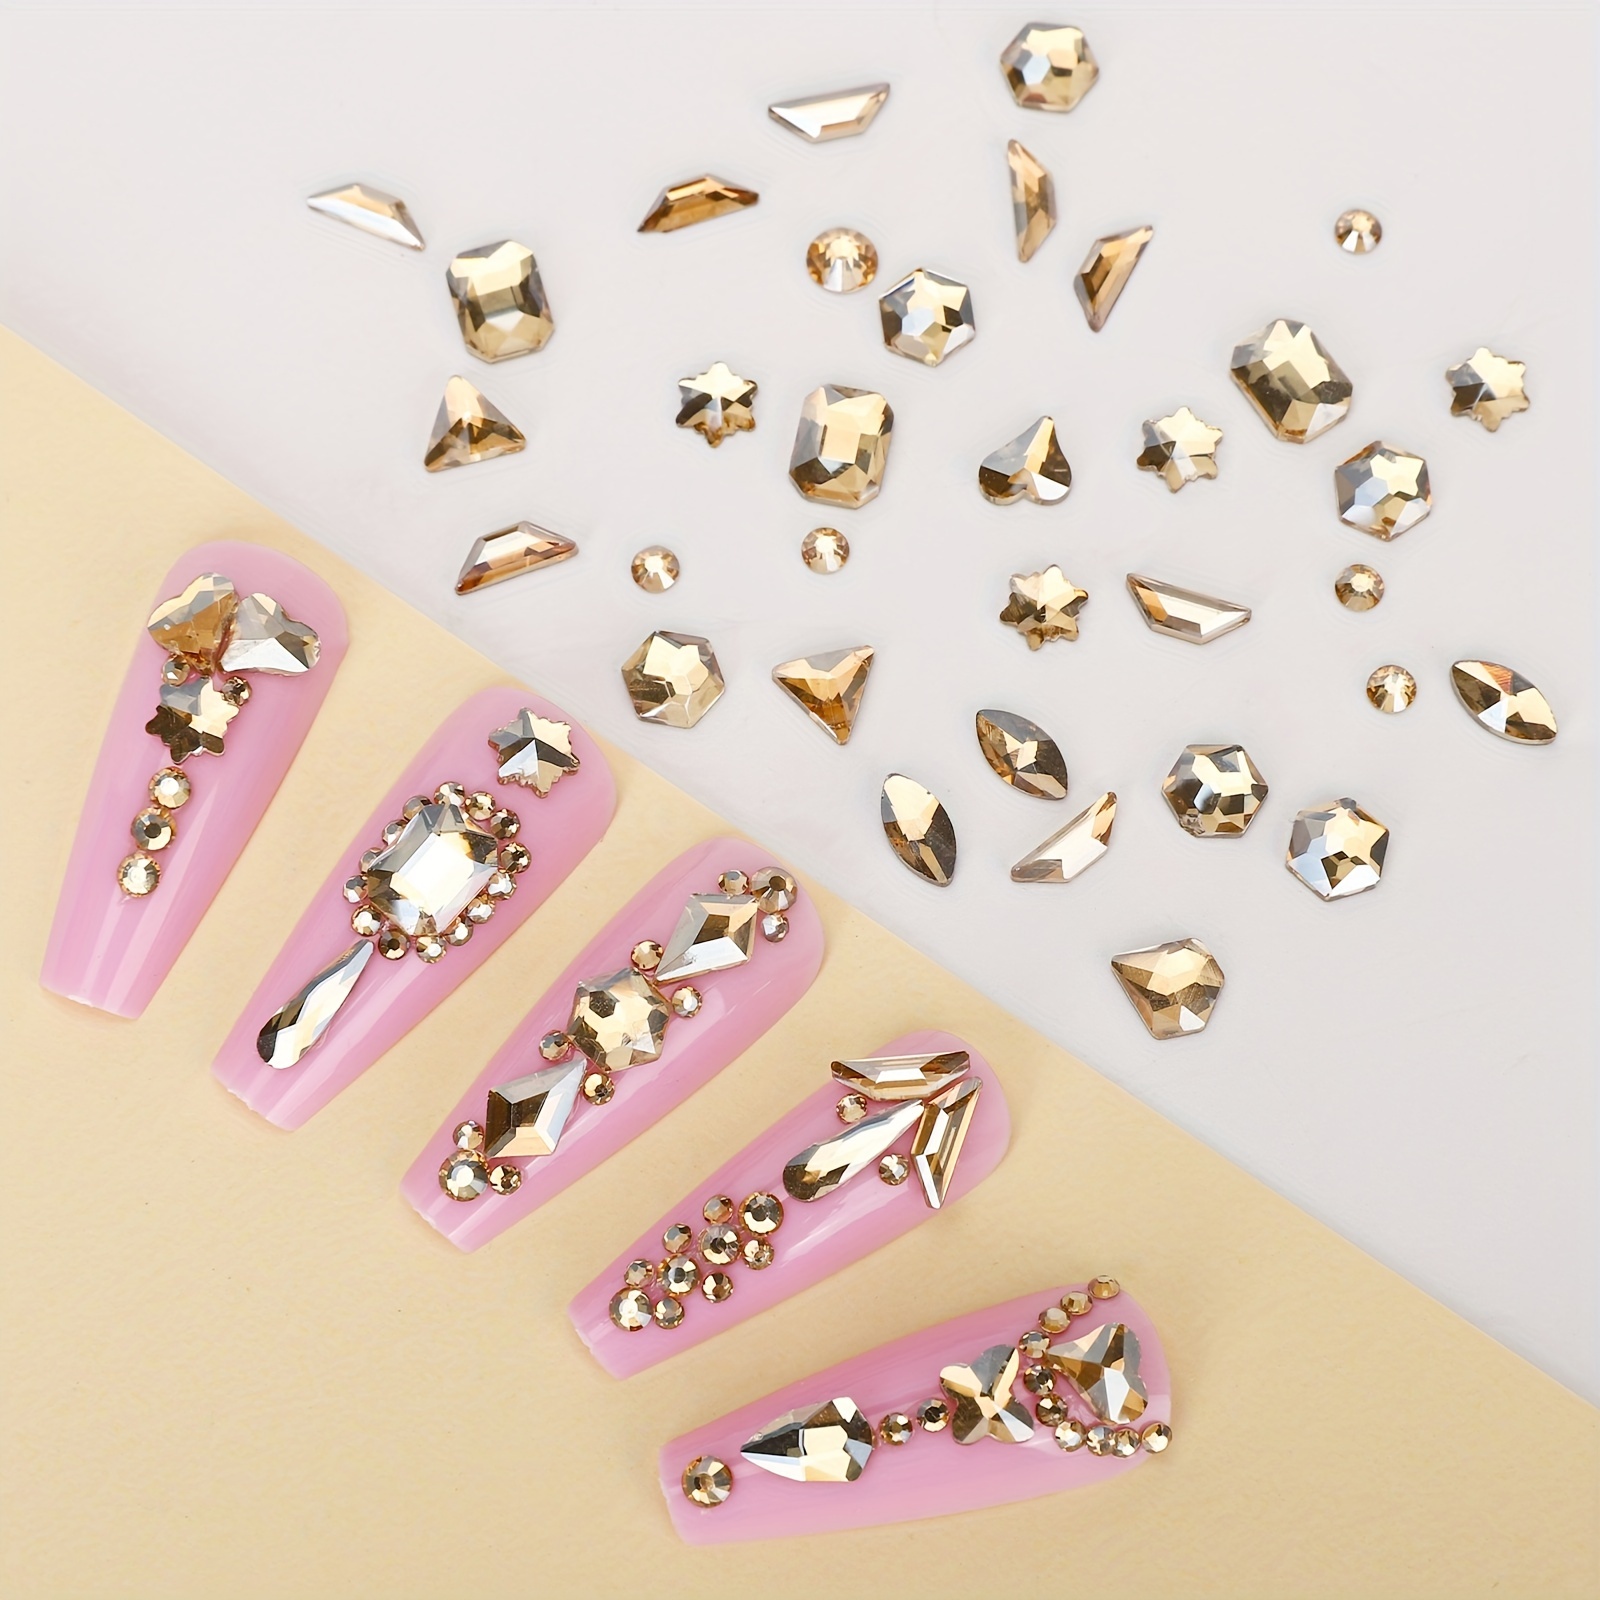  HINABTRU Gold Rhinestones for Nails Champagne Nail Gems  Diamonds-7220Pcs Gold Nail Crystals Jewels-Nail Charms Accessories for Nail  Decoration(14 Different Shape+ 6520 Round Gold Nail Stones+Wax Pen) :  Beauty & Personal Care